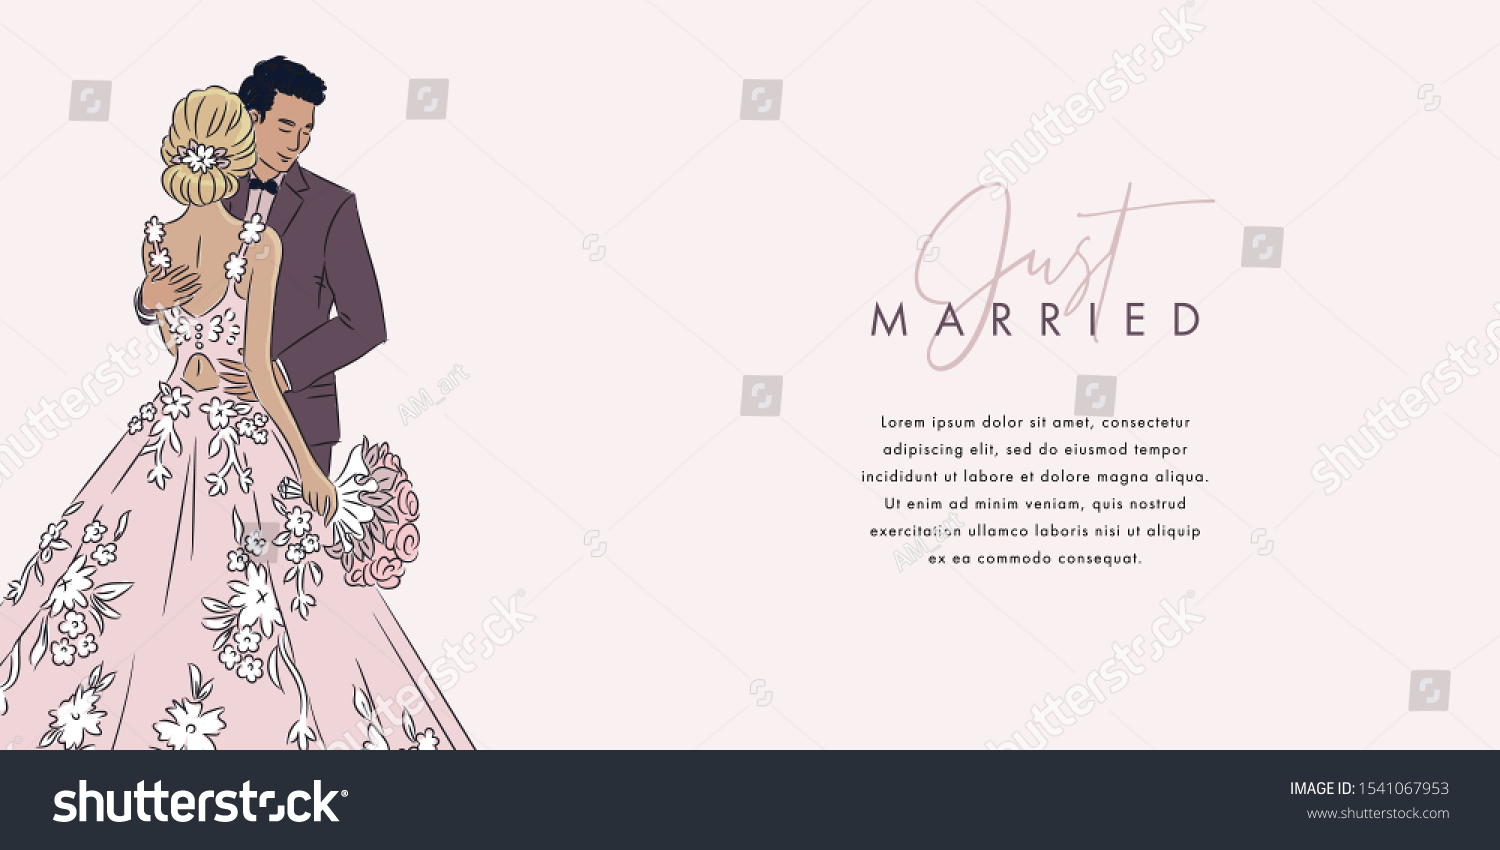 Wedding Banner Design Template Cute Young Stock Vector (Royalty  For Wedding Banner Design Templates